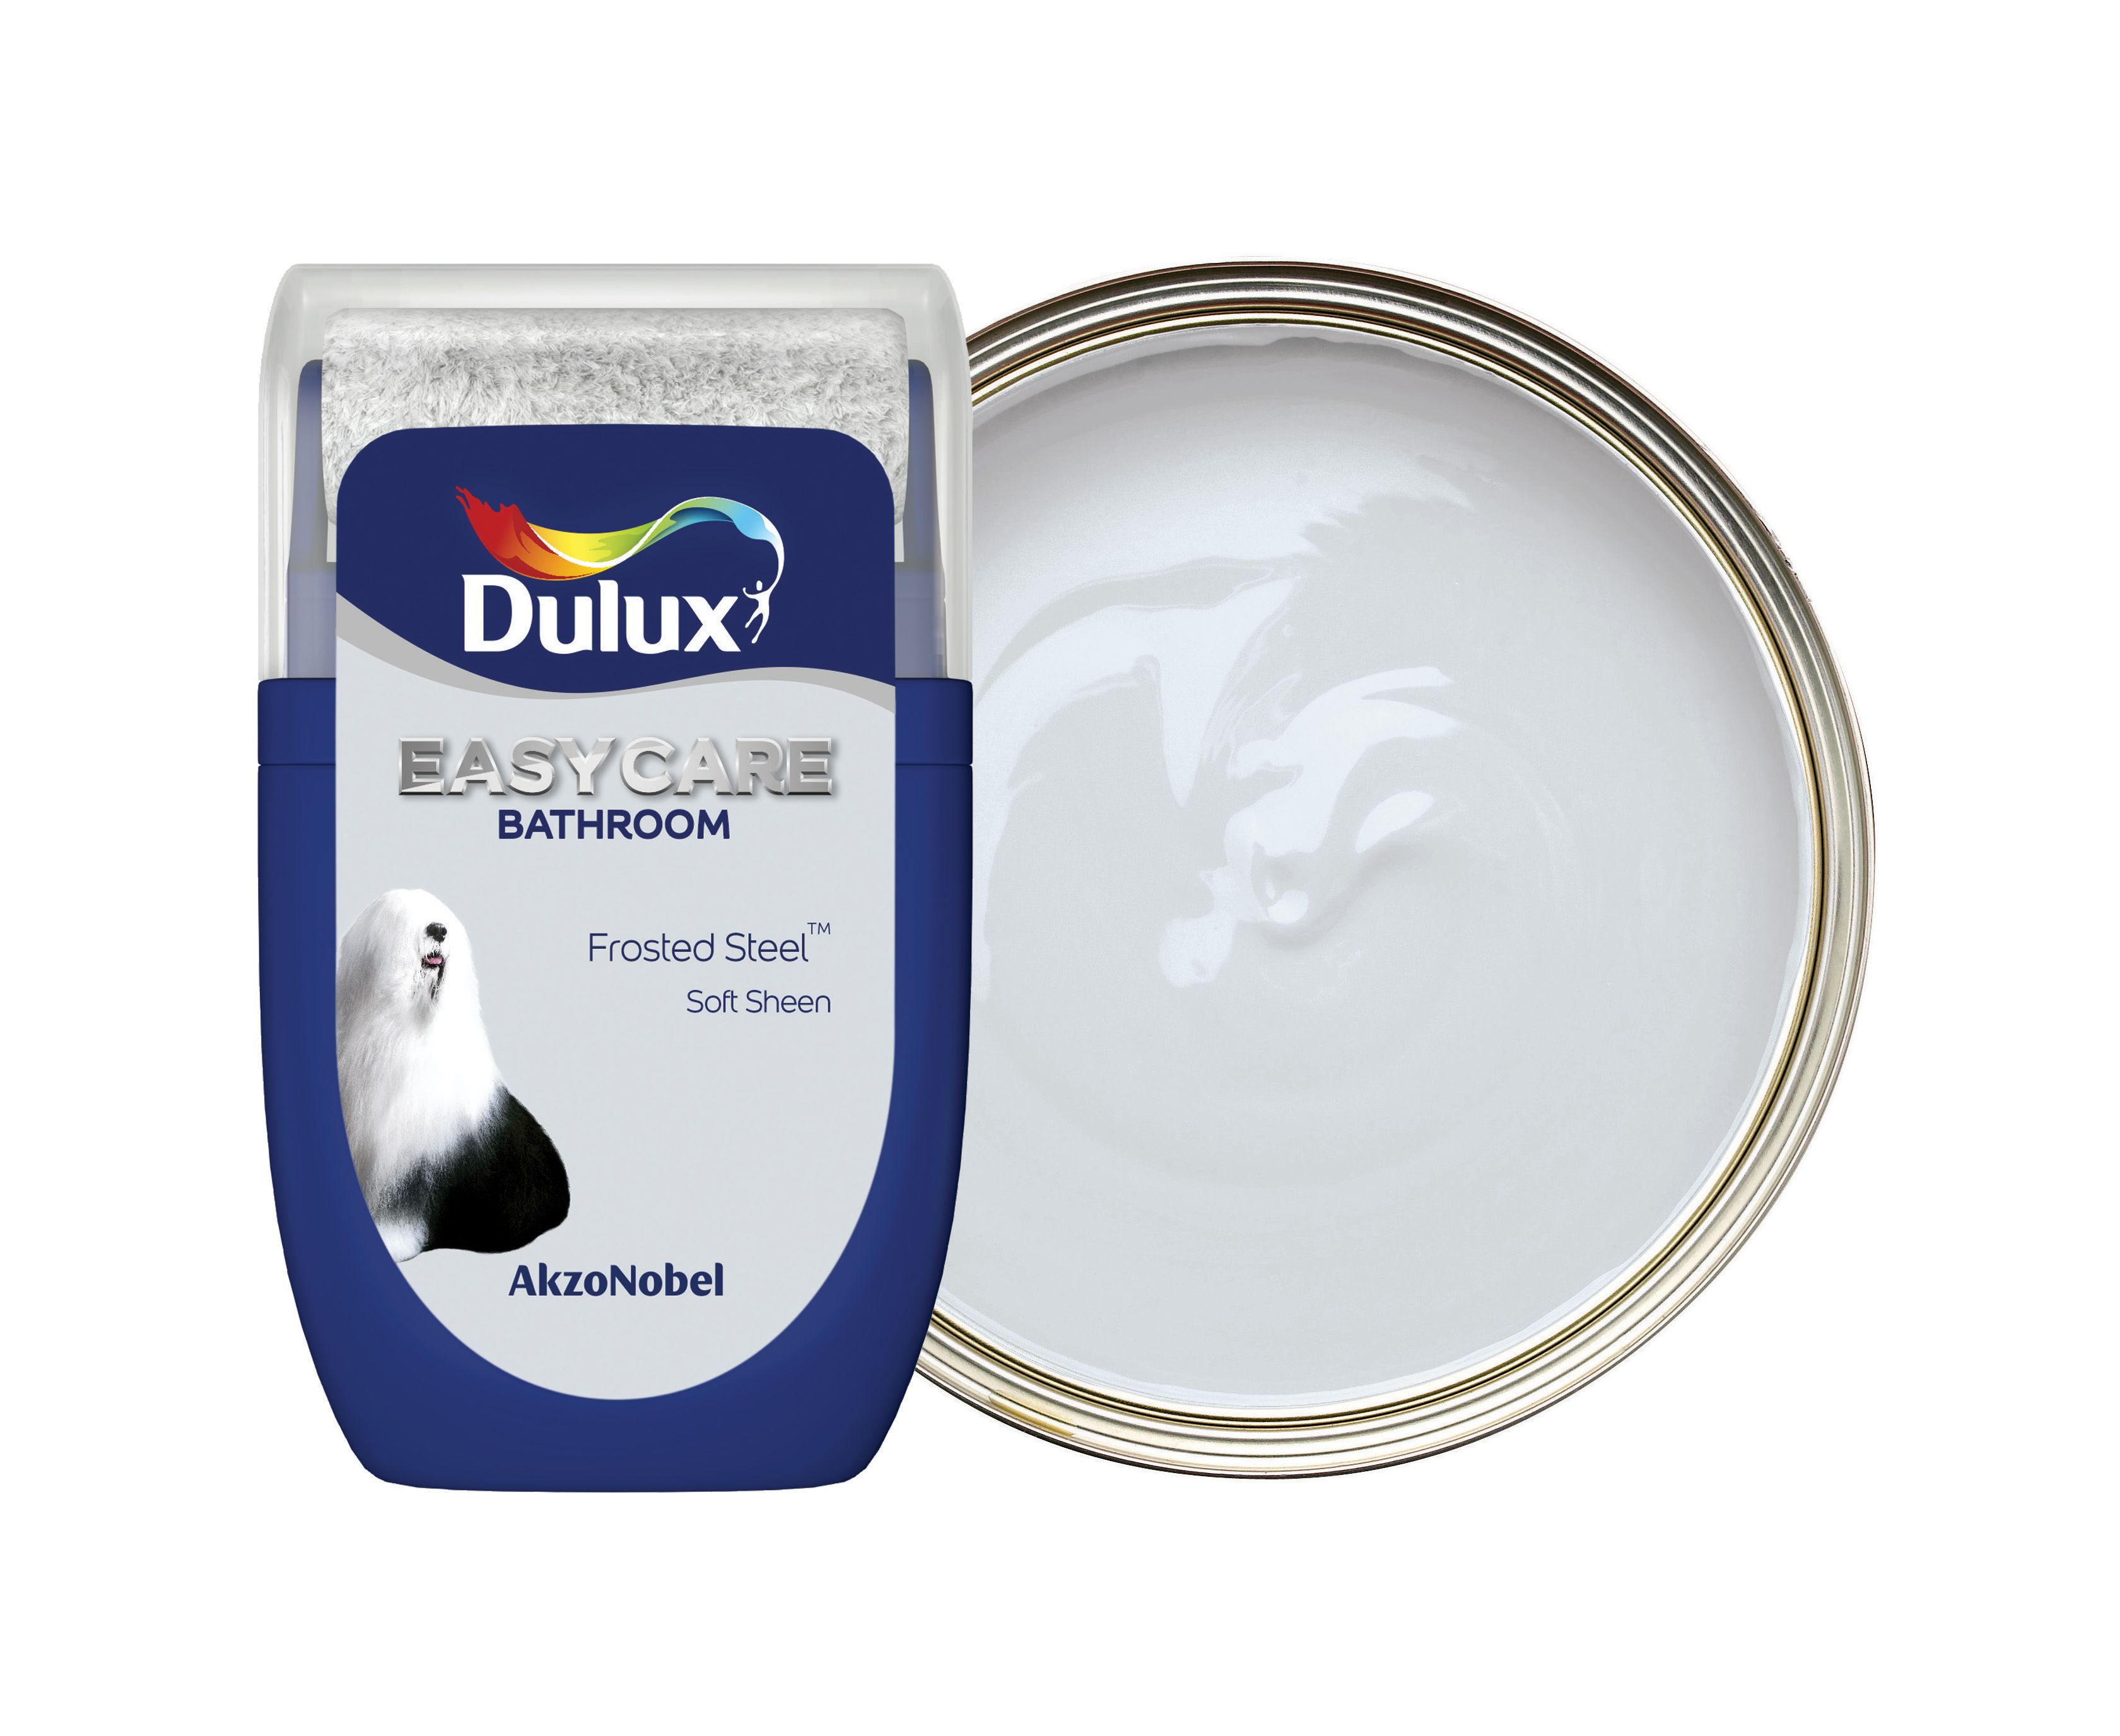 Dulux Easycare Bathroom Paint Tester Pot - Frosted Steel - 30ml